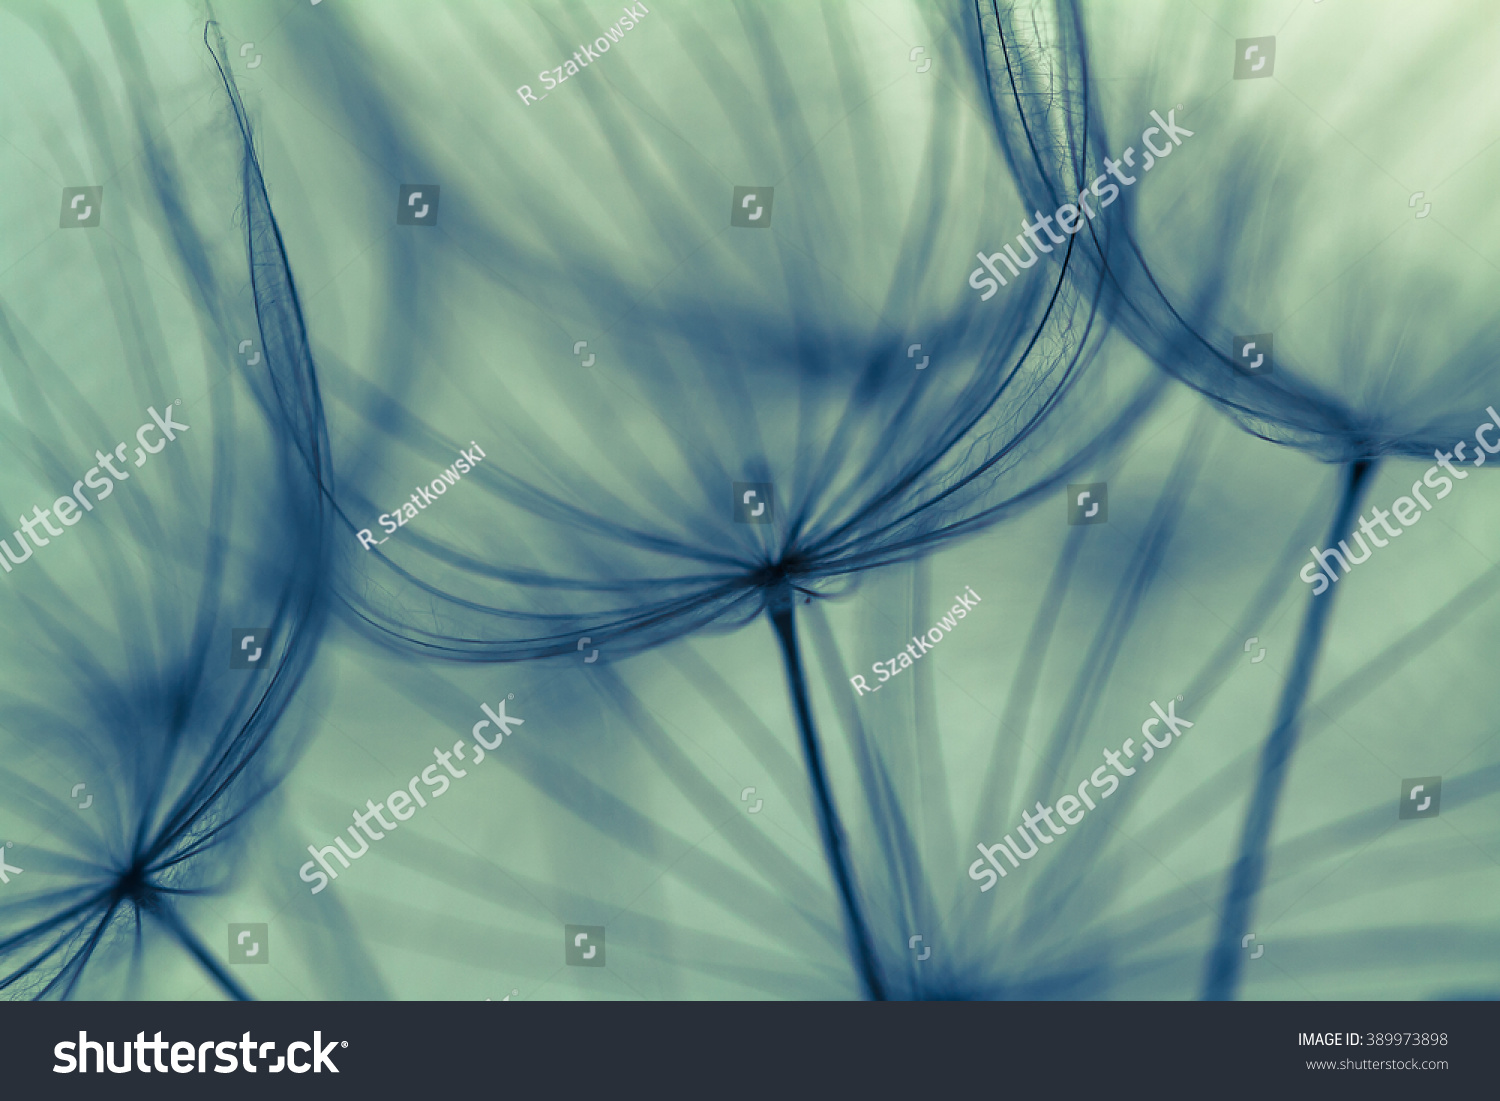 Abstract dandelion flower background, extreme closeup. Big dandelion on natural background. Art photography  #389973898